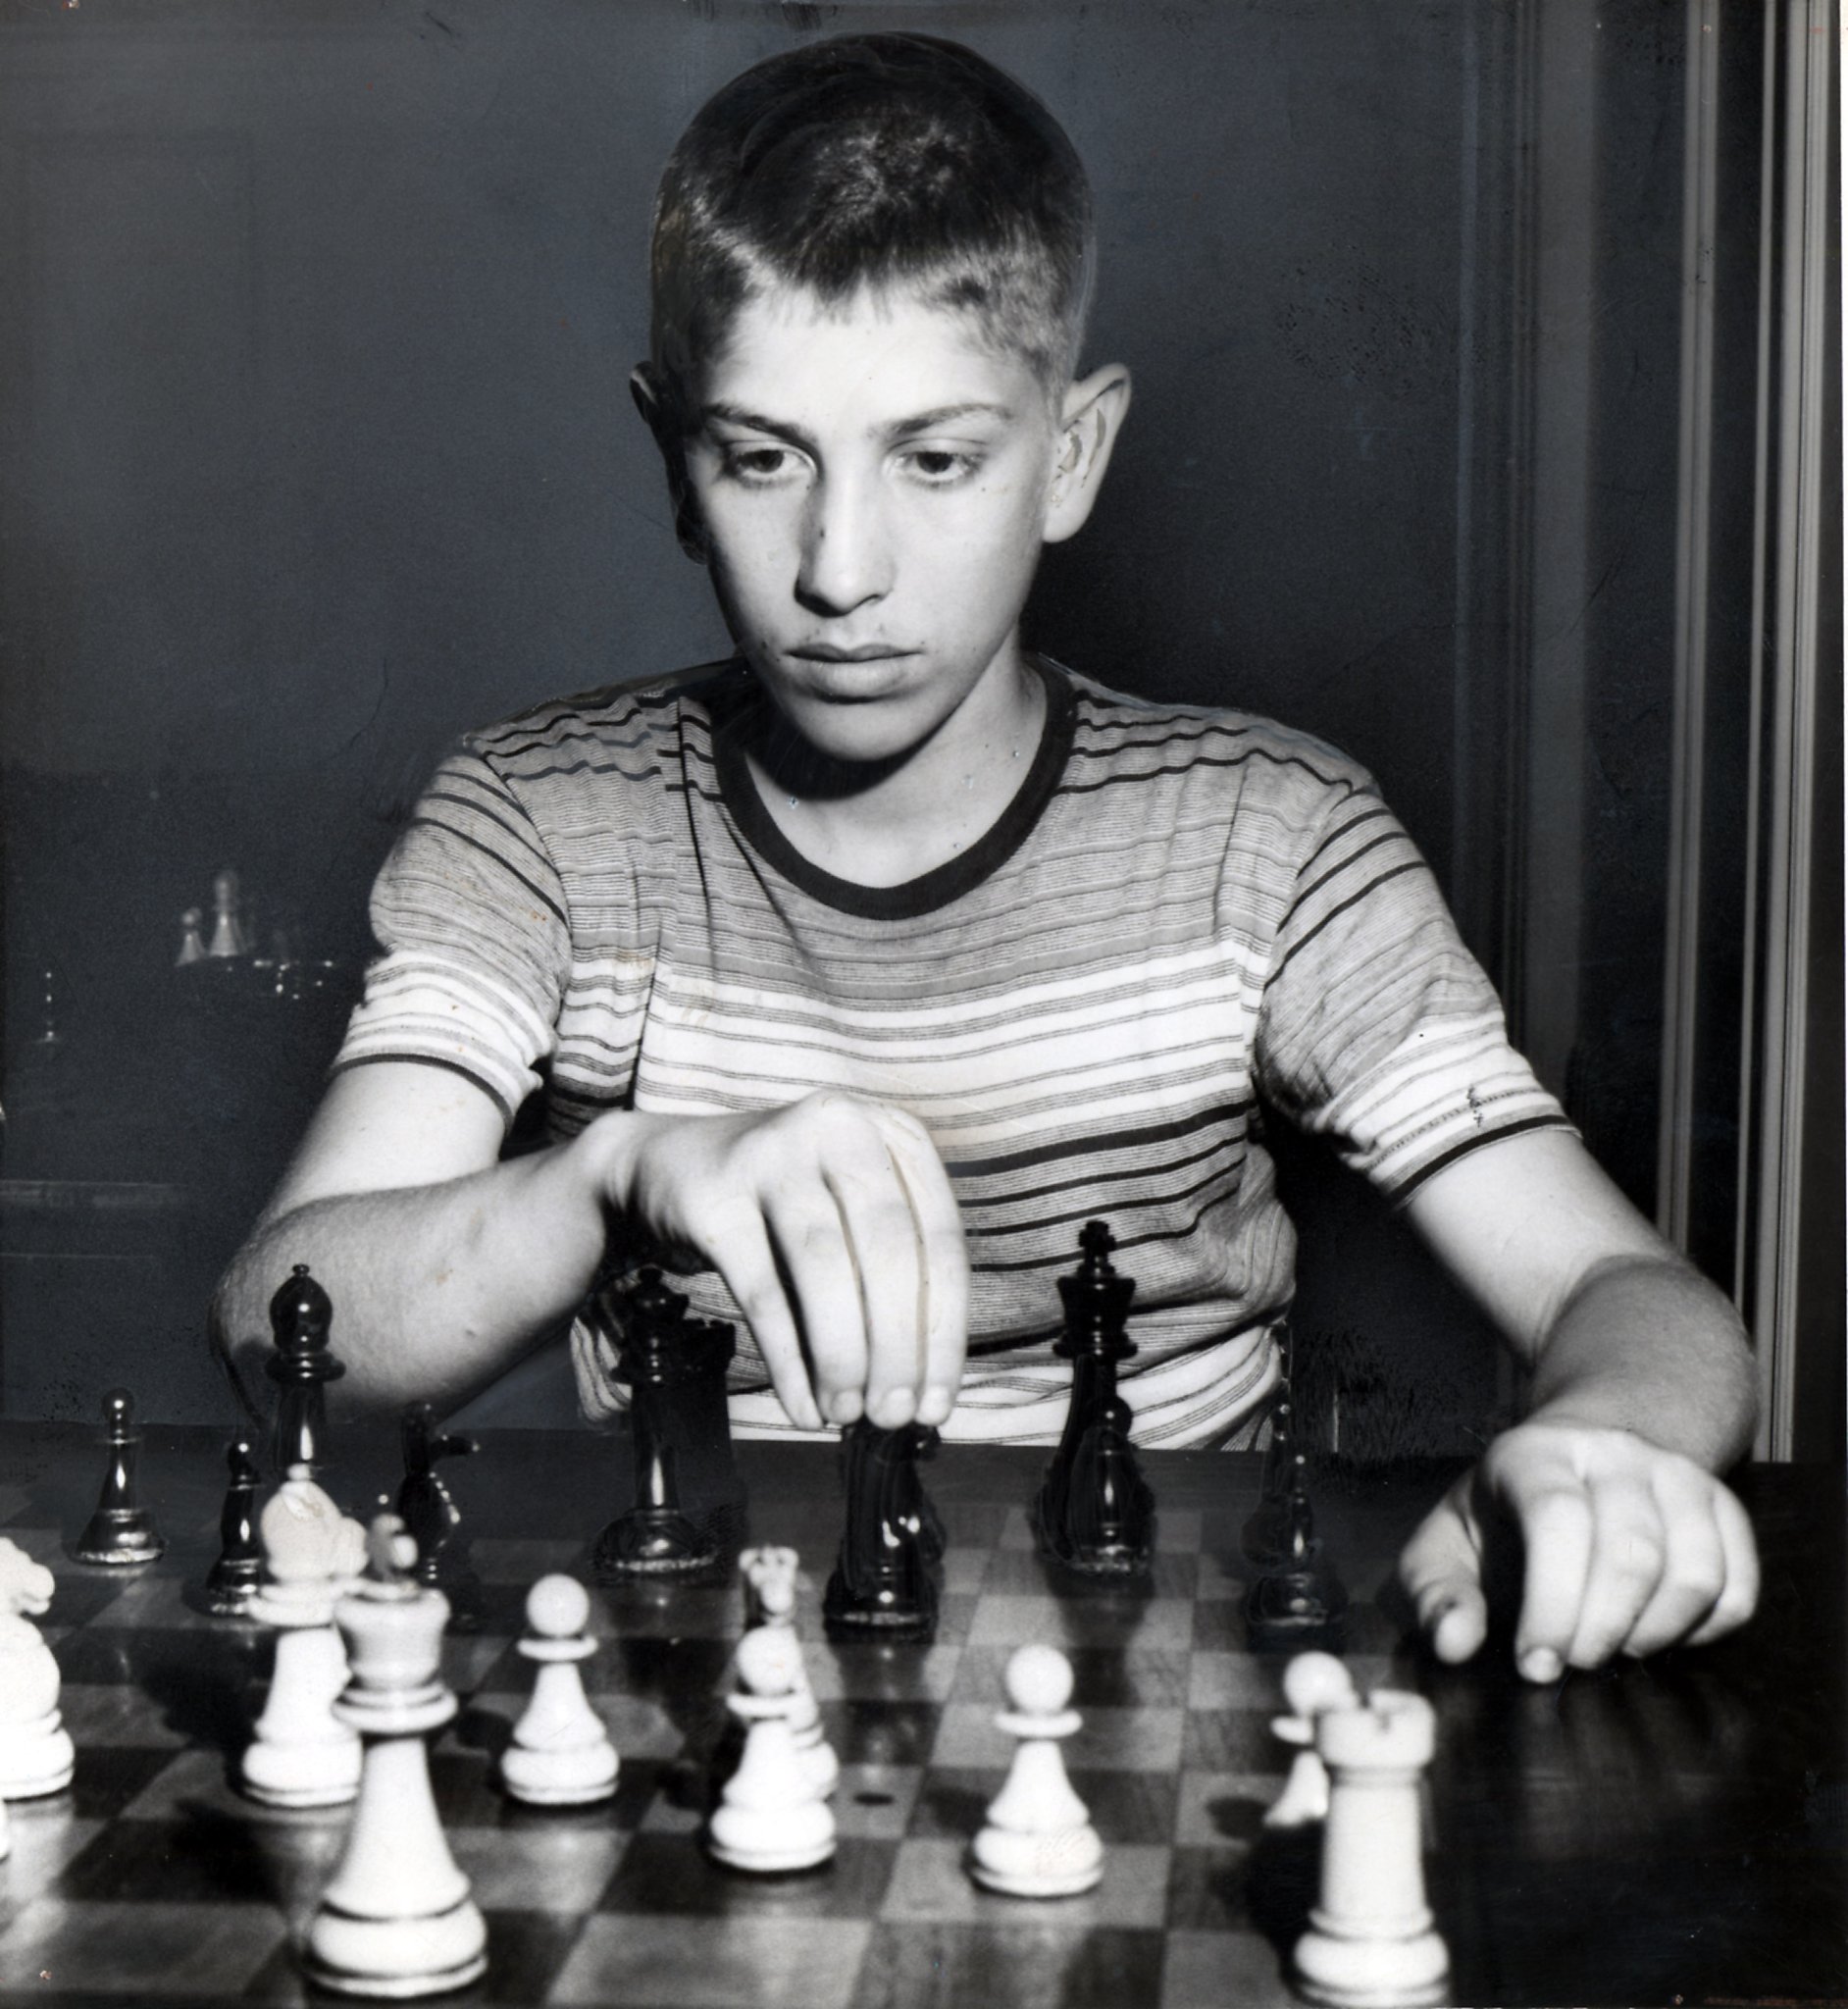 Bobby Fischer, Chess Master, Dies at 64 - The New York Times